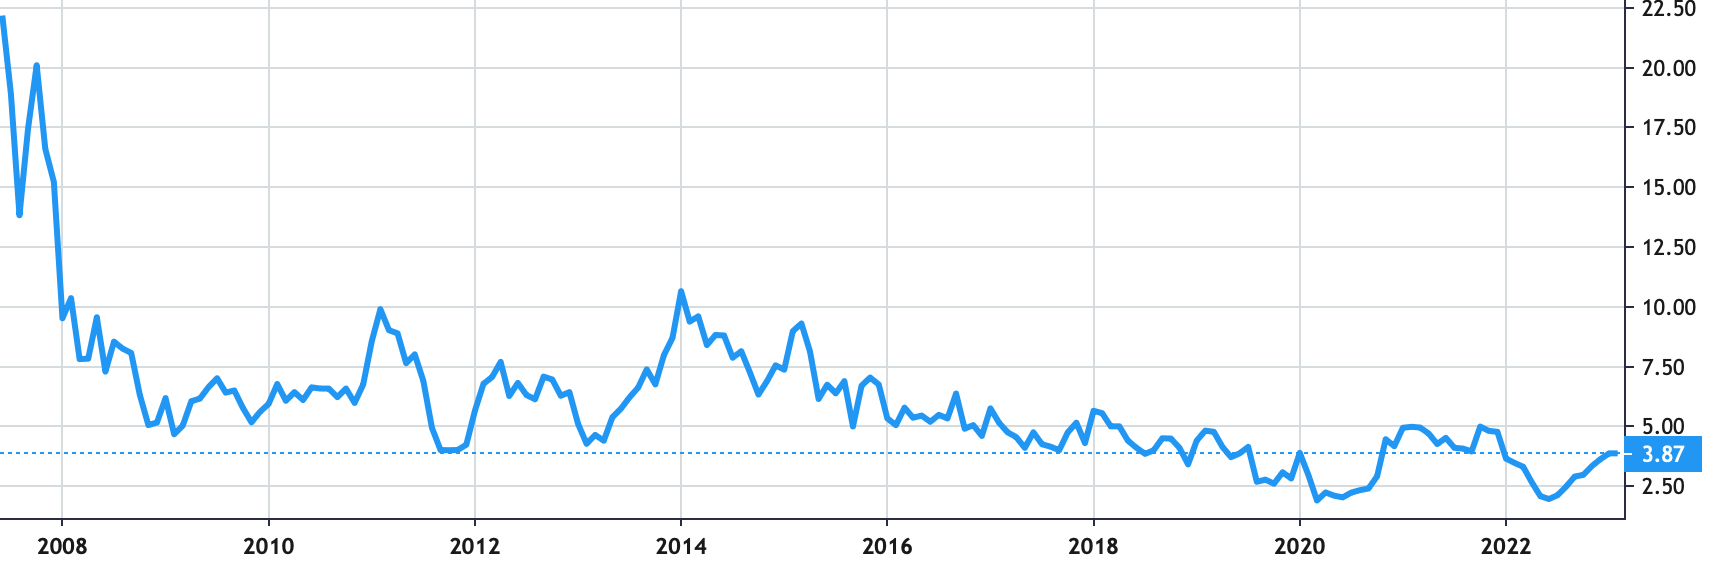 Accuray Inc share price history